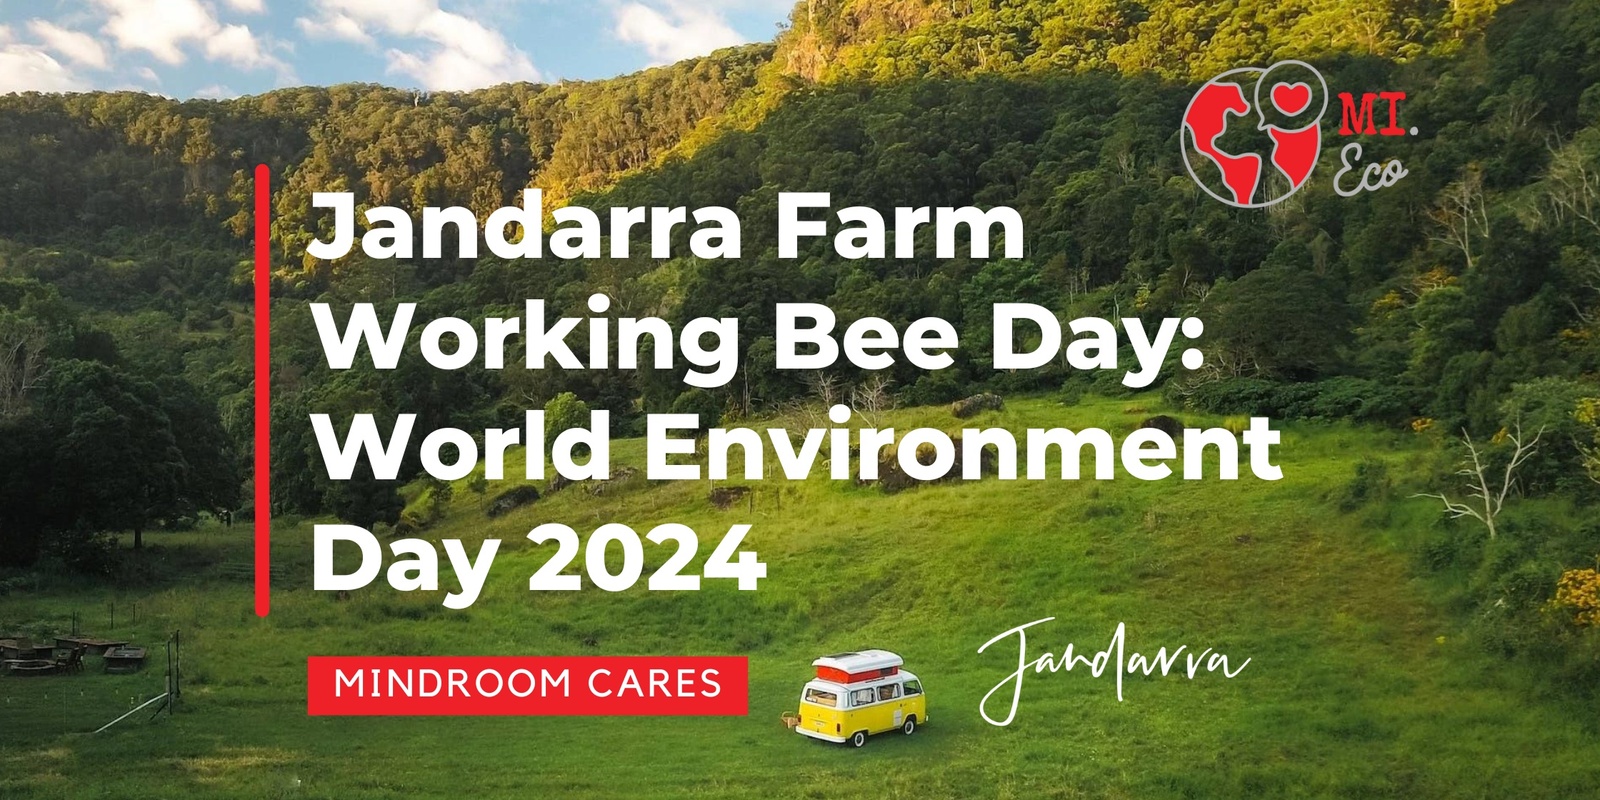 Banner image for Jandarra Farm Working Bee Day: World Environment Day 2024